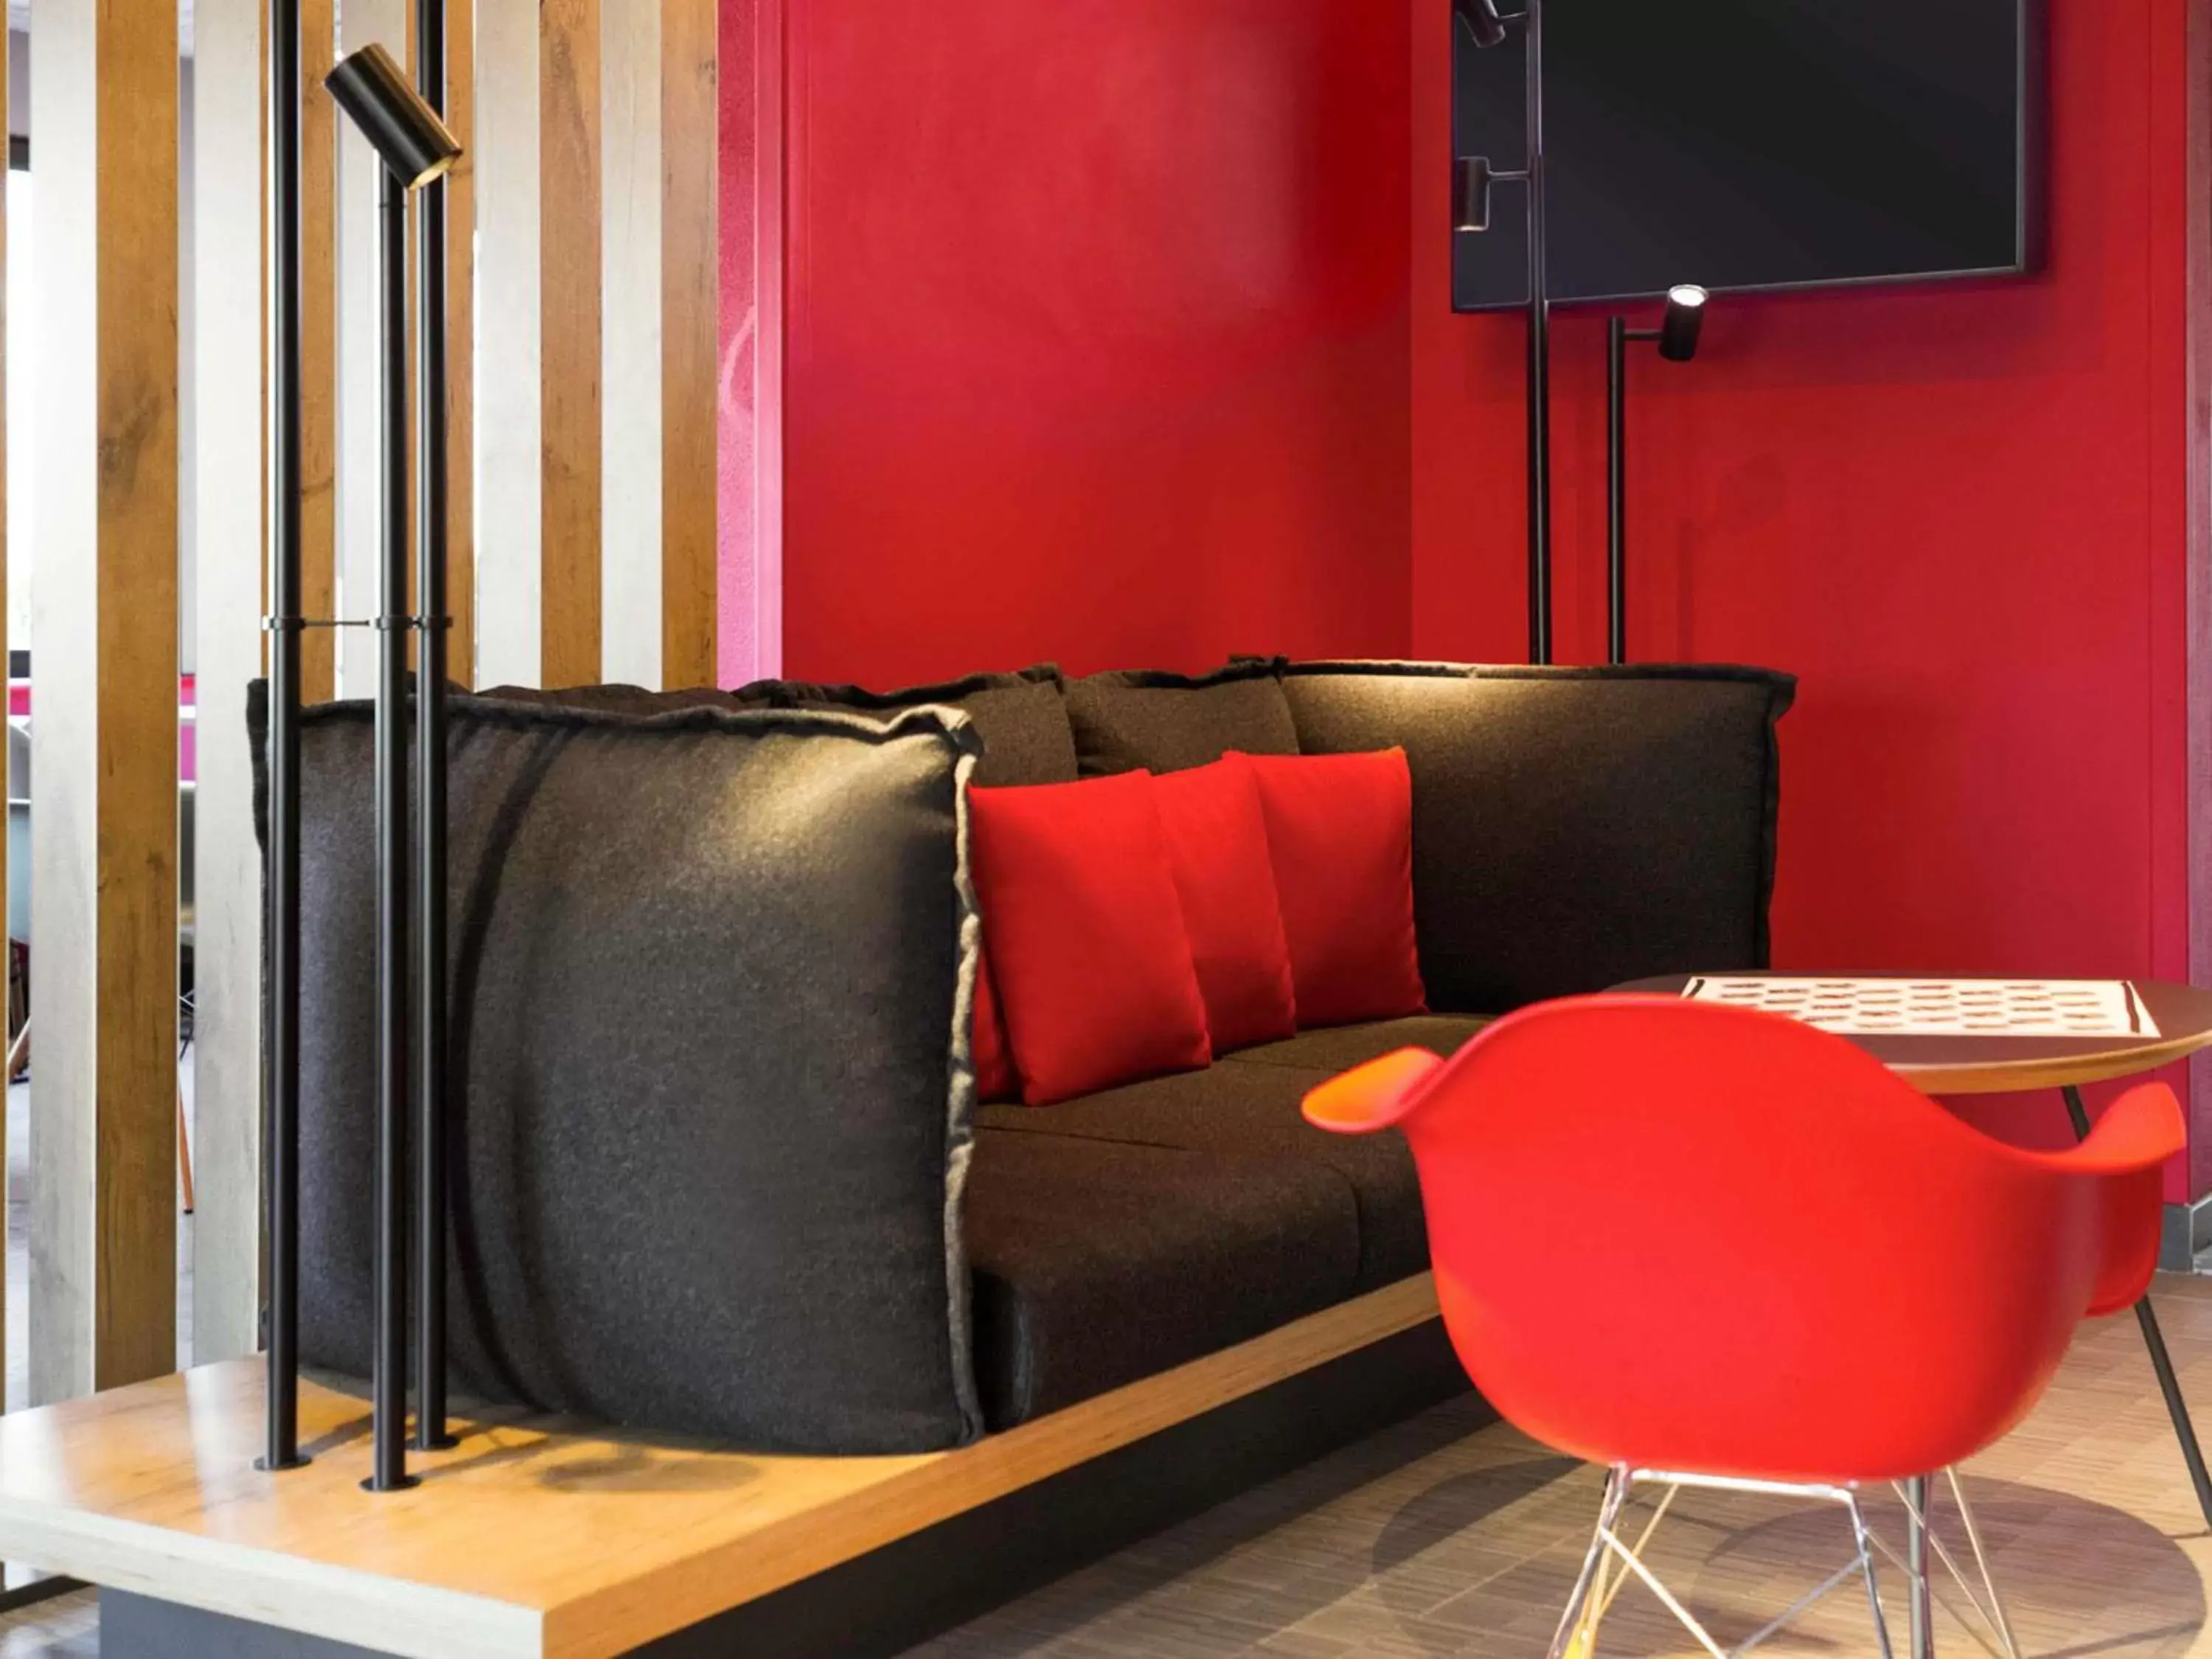 On site, Seating Area in ibis Hotel Brussels Airport